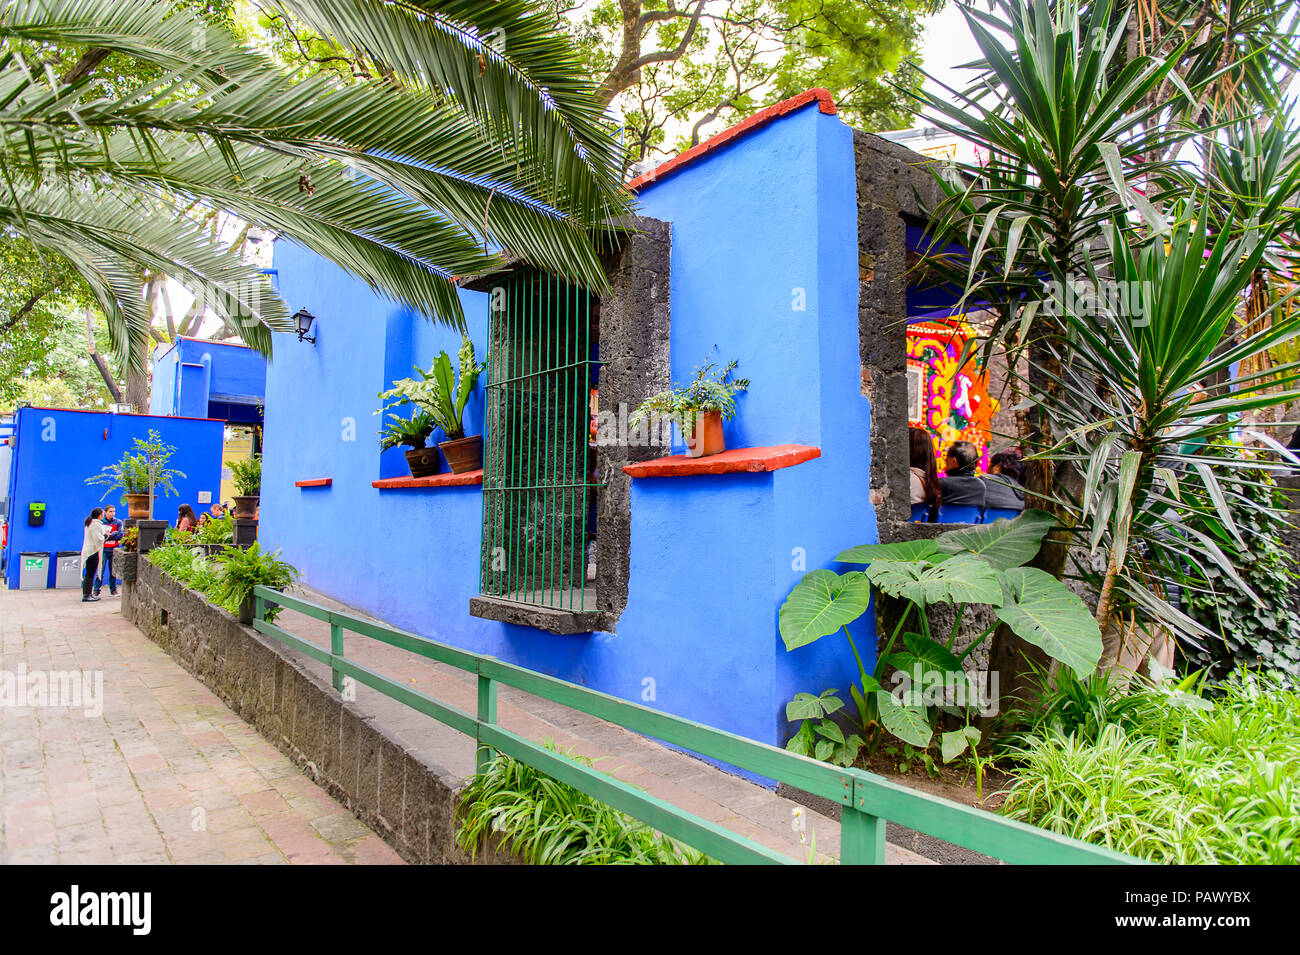 COYOACAN, MEXICO - OCT 28, 2016: Interior yard of the Blue House (La Casa Azul), historic house and art museum dedicated to the life and work of Mexic Stock Photo